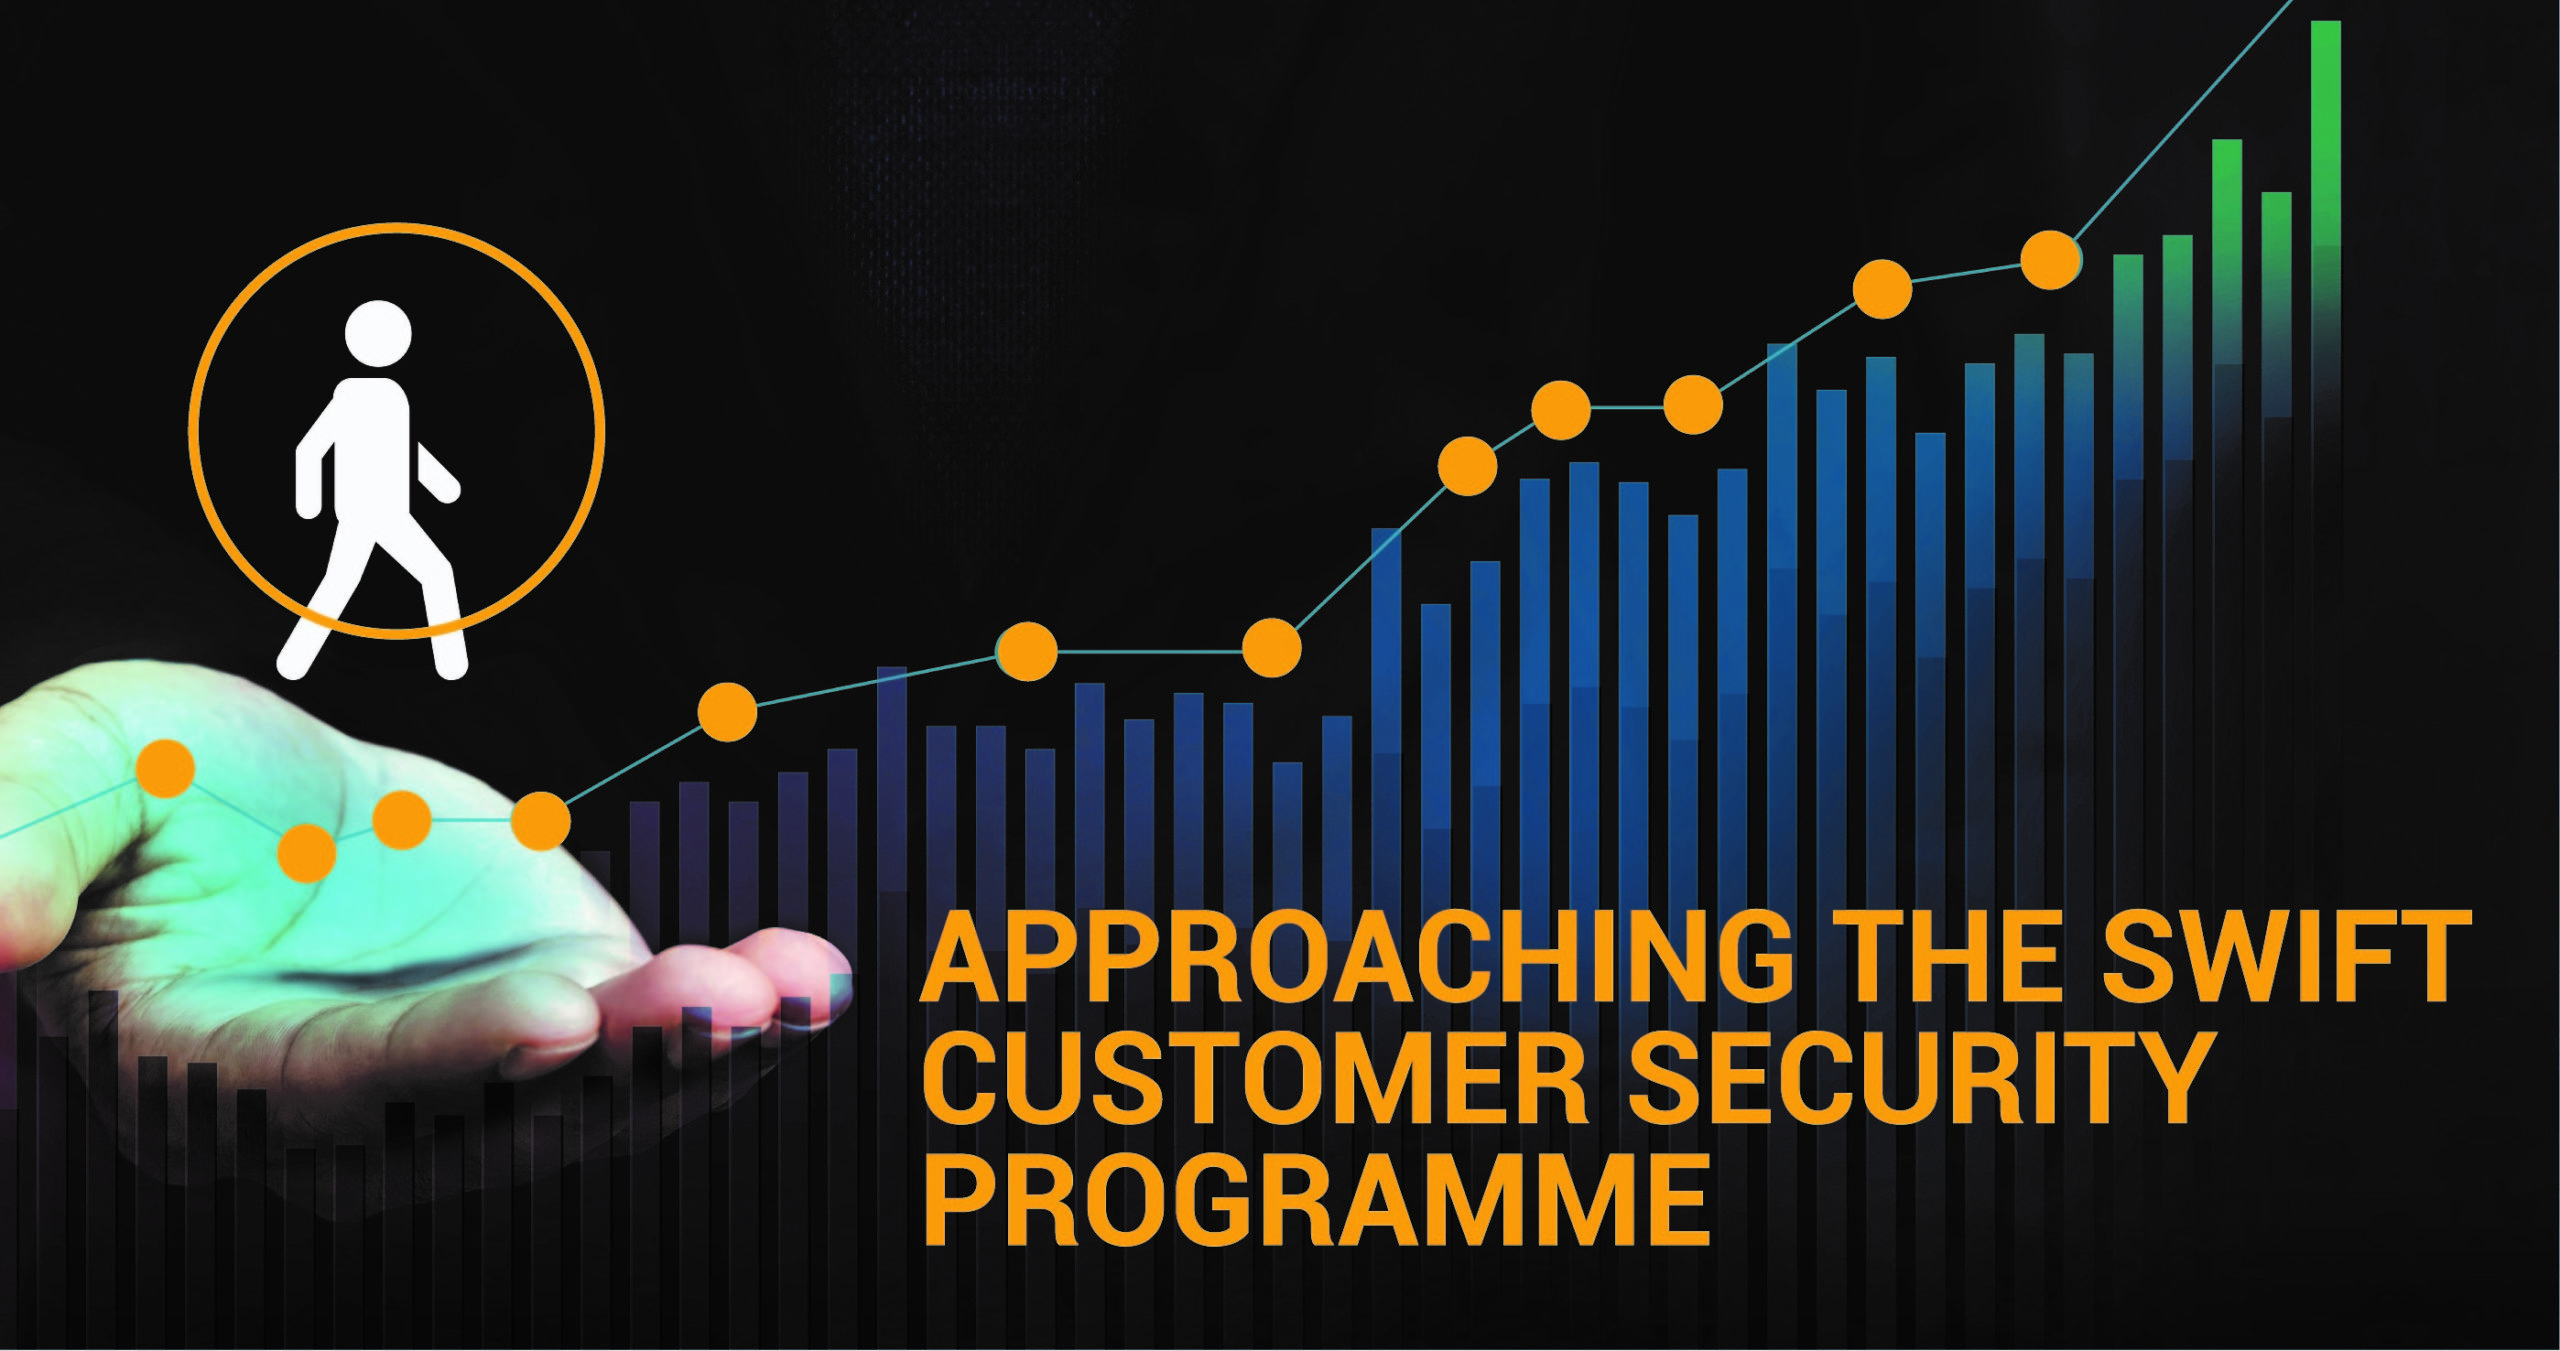 Approaching the SWIFT Customer Security Programme – 5 Expert Tips from Independent CSP Assessors